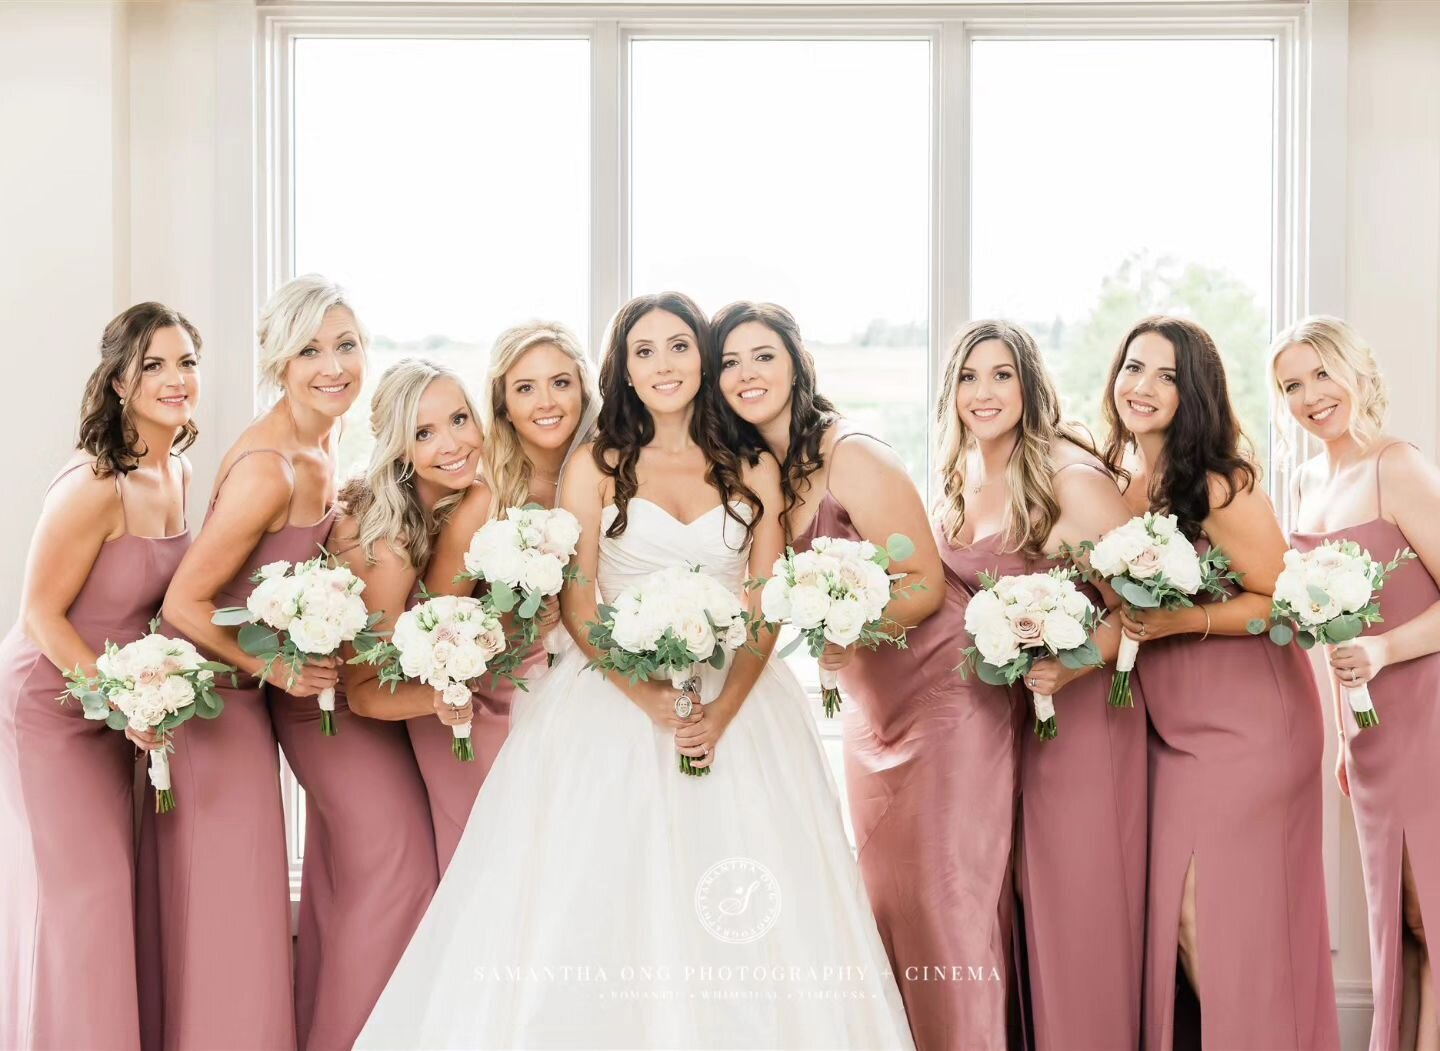 This group had us laughing in tears 🥰 it was such a fun morning. 

Makeup by Lelo &amp; Donna
@beautyhauscollective 

📸 @samanthaongphoto